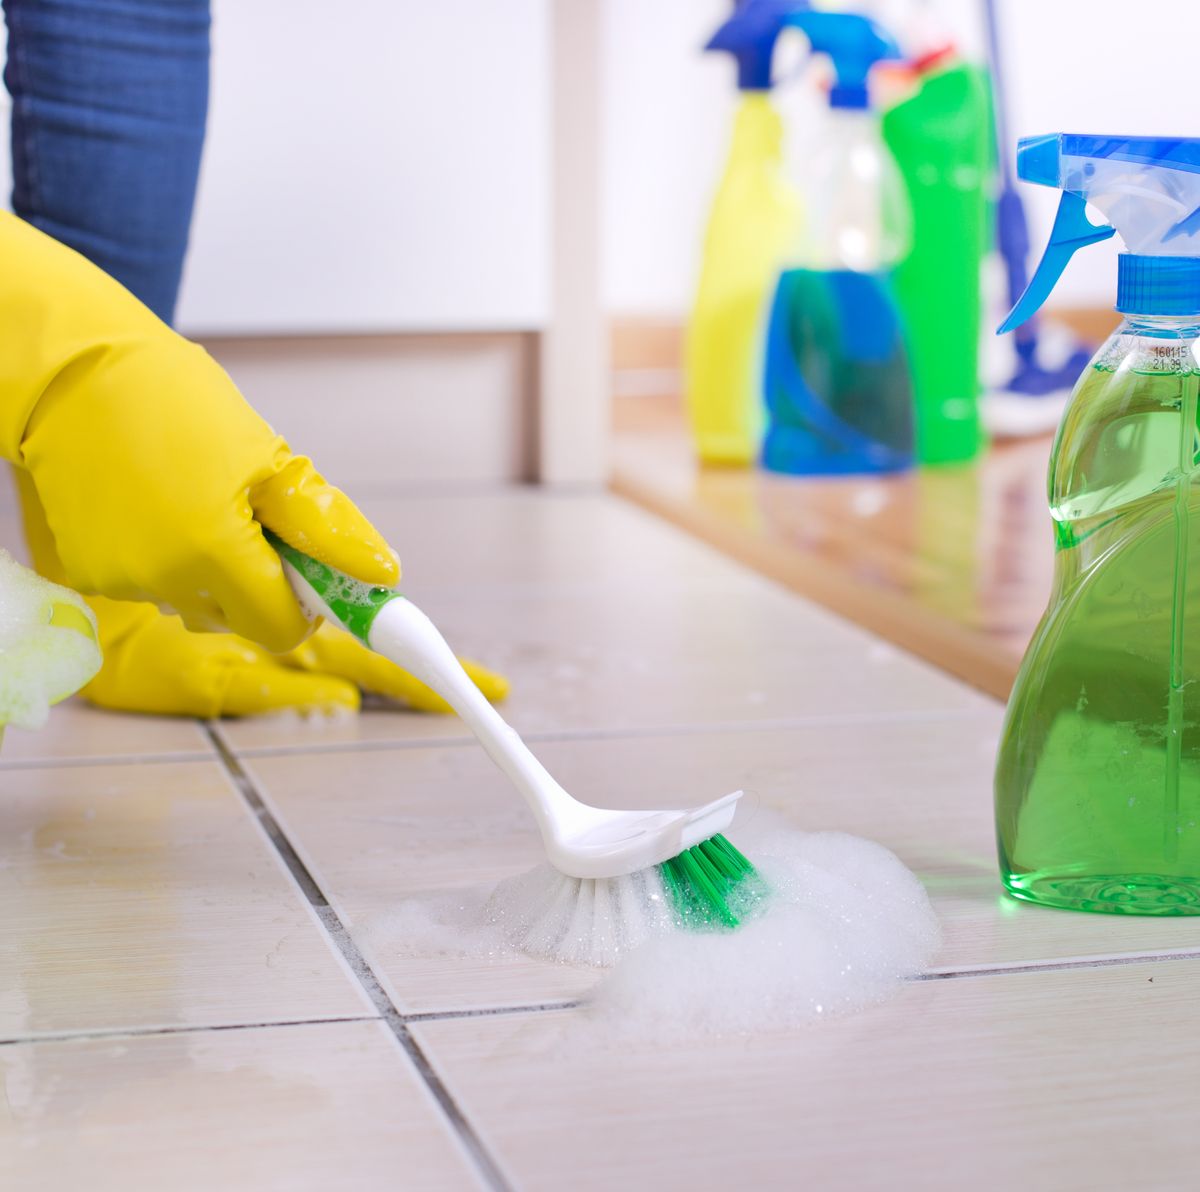 Tile Cleaning Equipment Buyers Guide